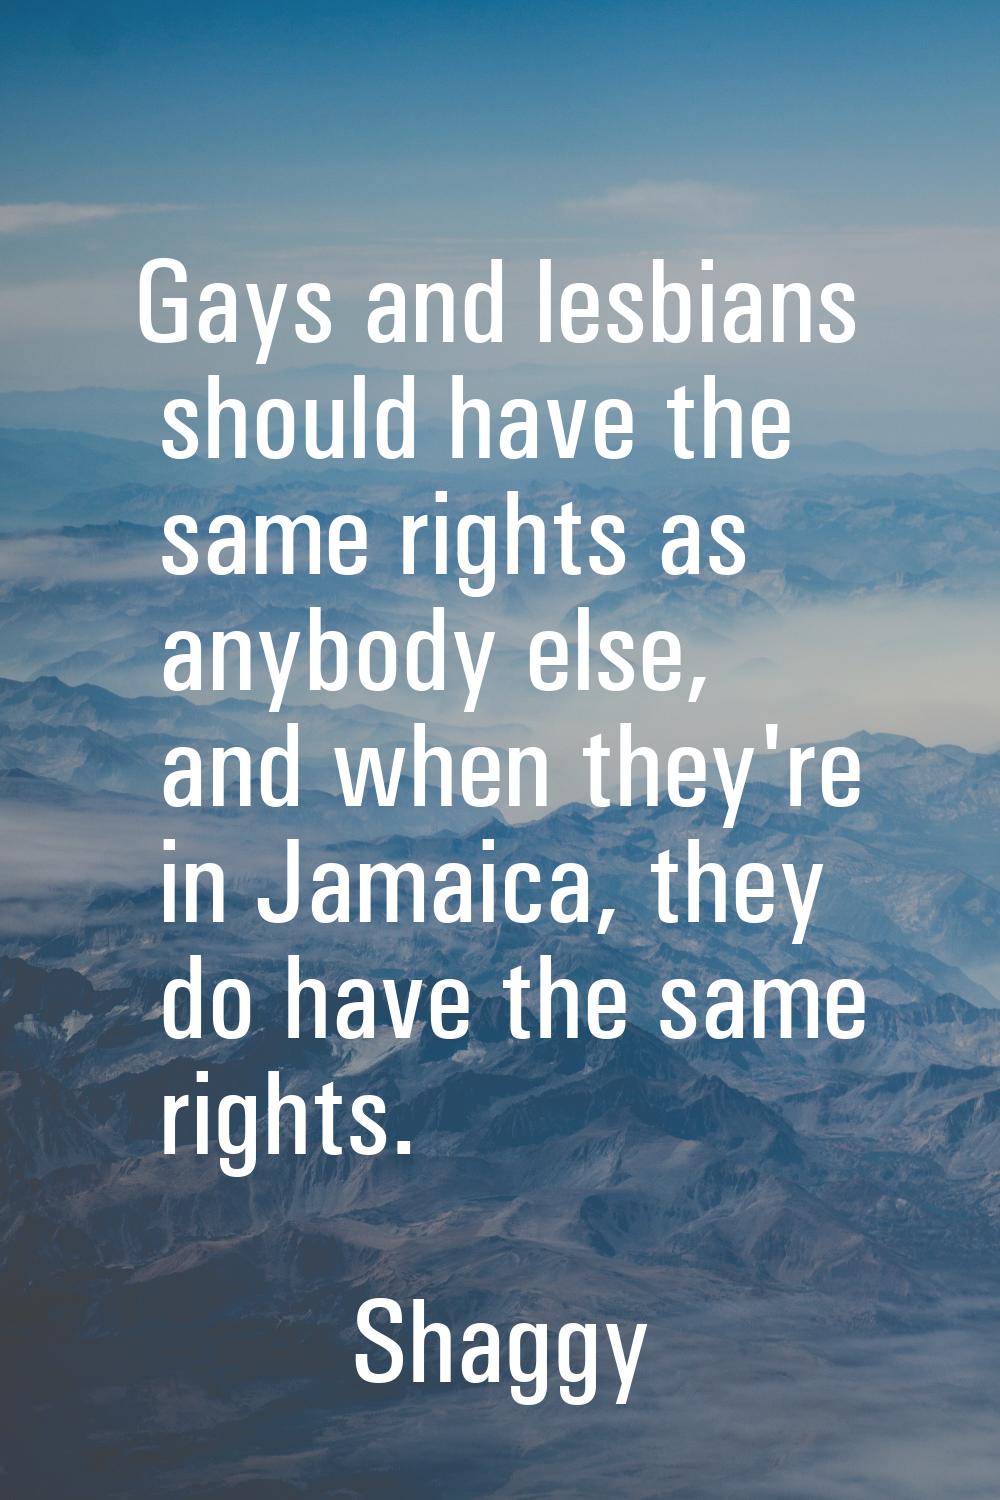 Gays and lesbians should have the same rights as anybody else, and when they're in Jamaica, they do